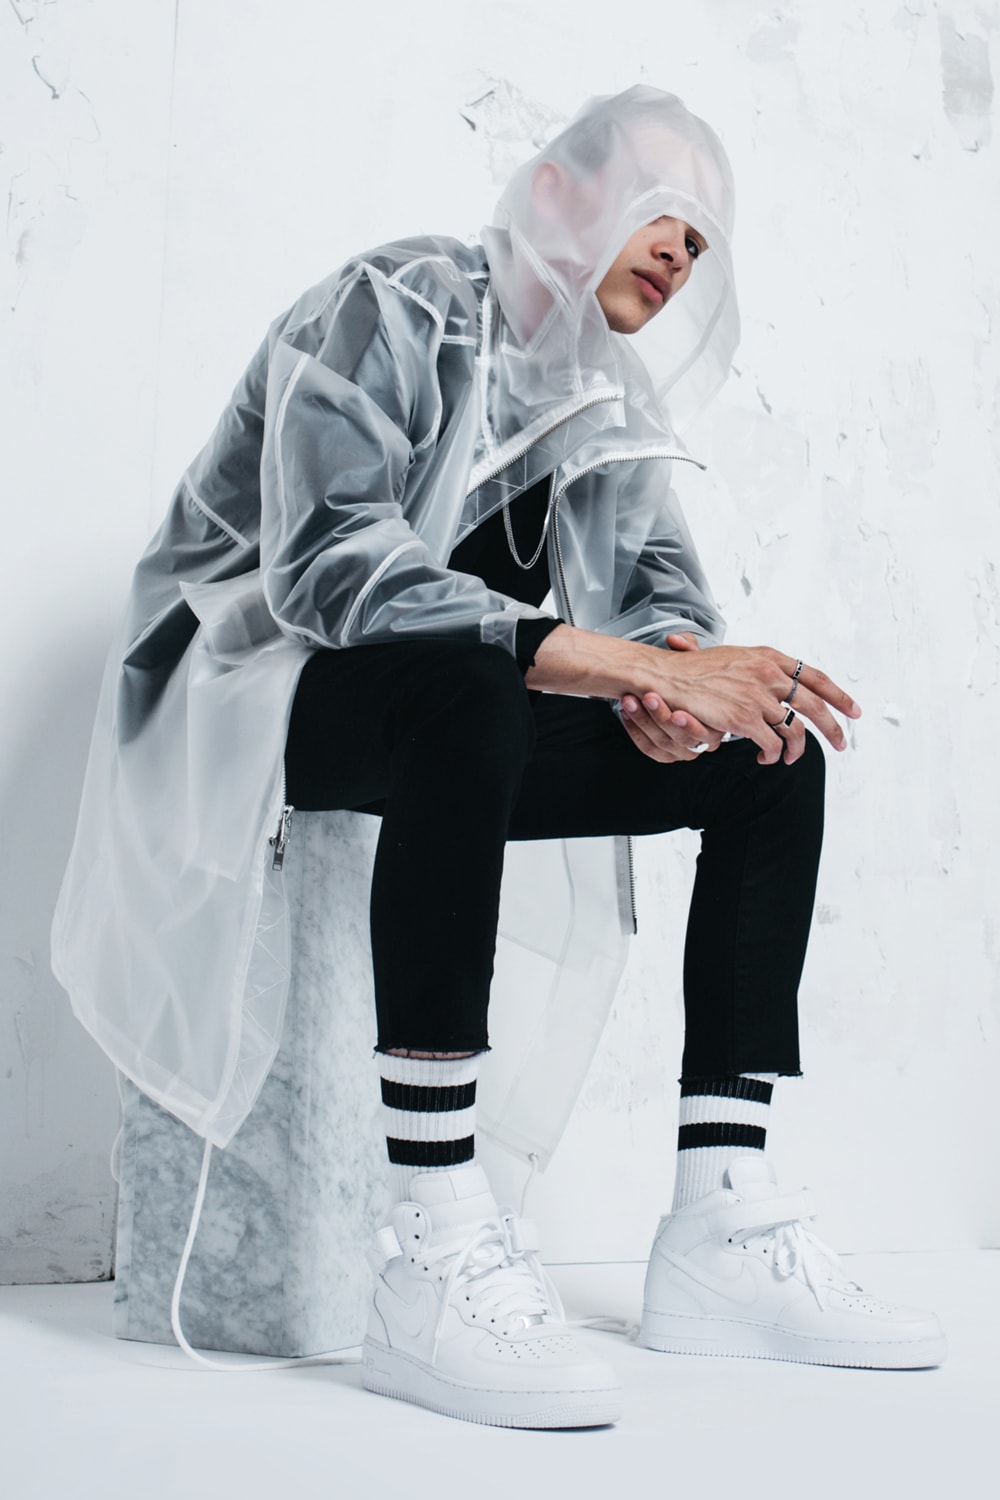 STAMPD Chris Stamp The Mummy Capsule Collection Collaboration Transparent Translucent Trench